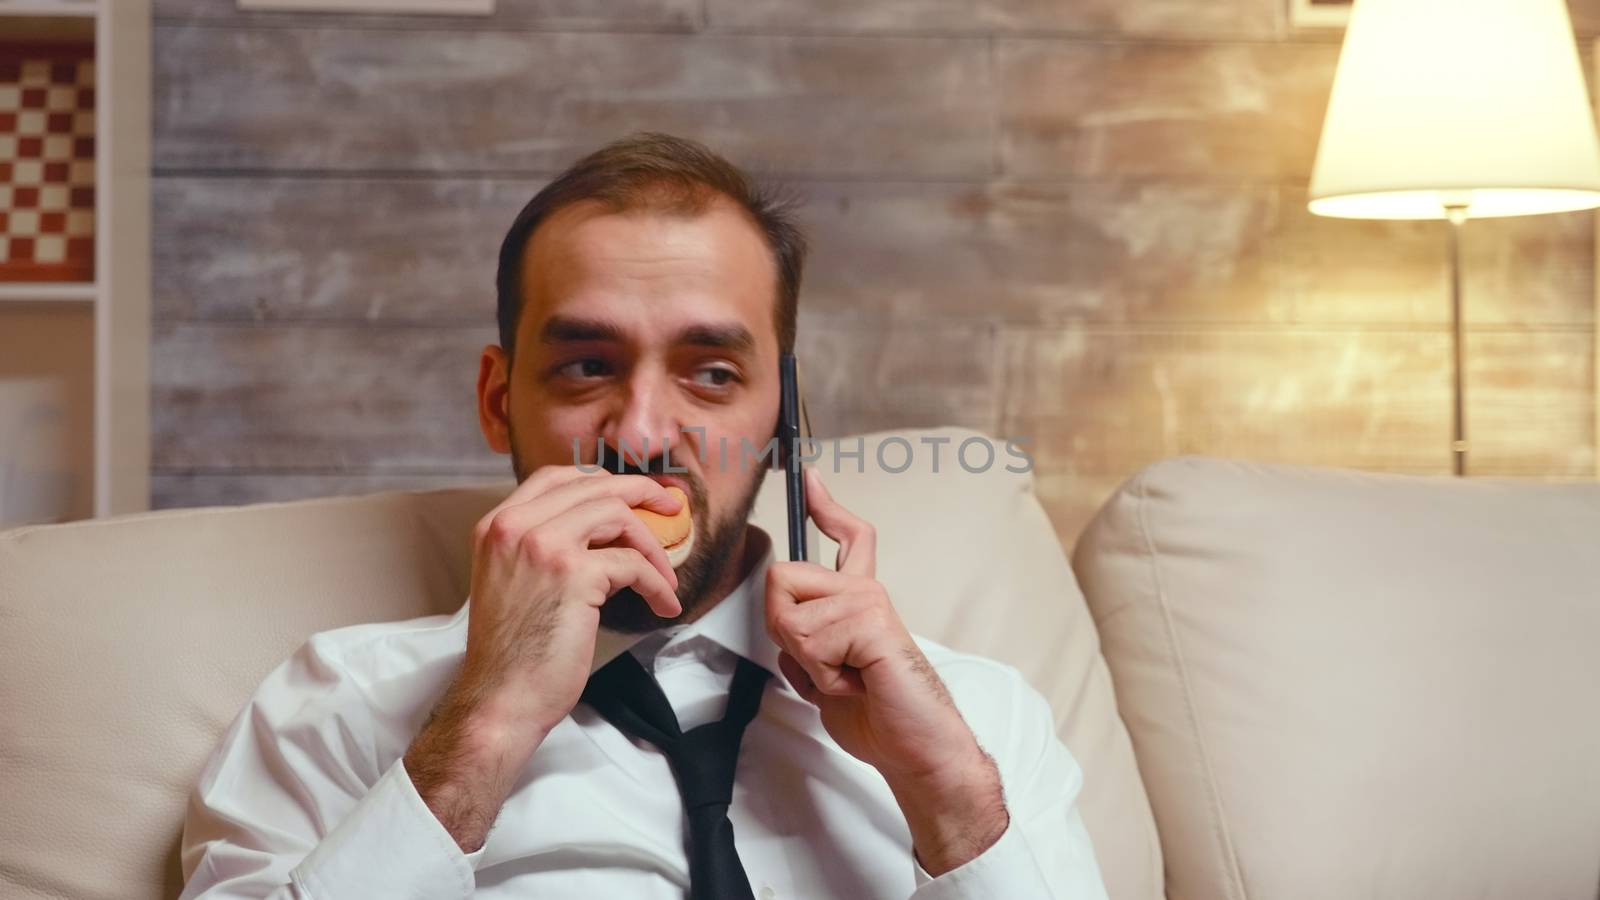 Young entrepreneur in formalwear eating a burger while having a business conversation on the phone.